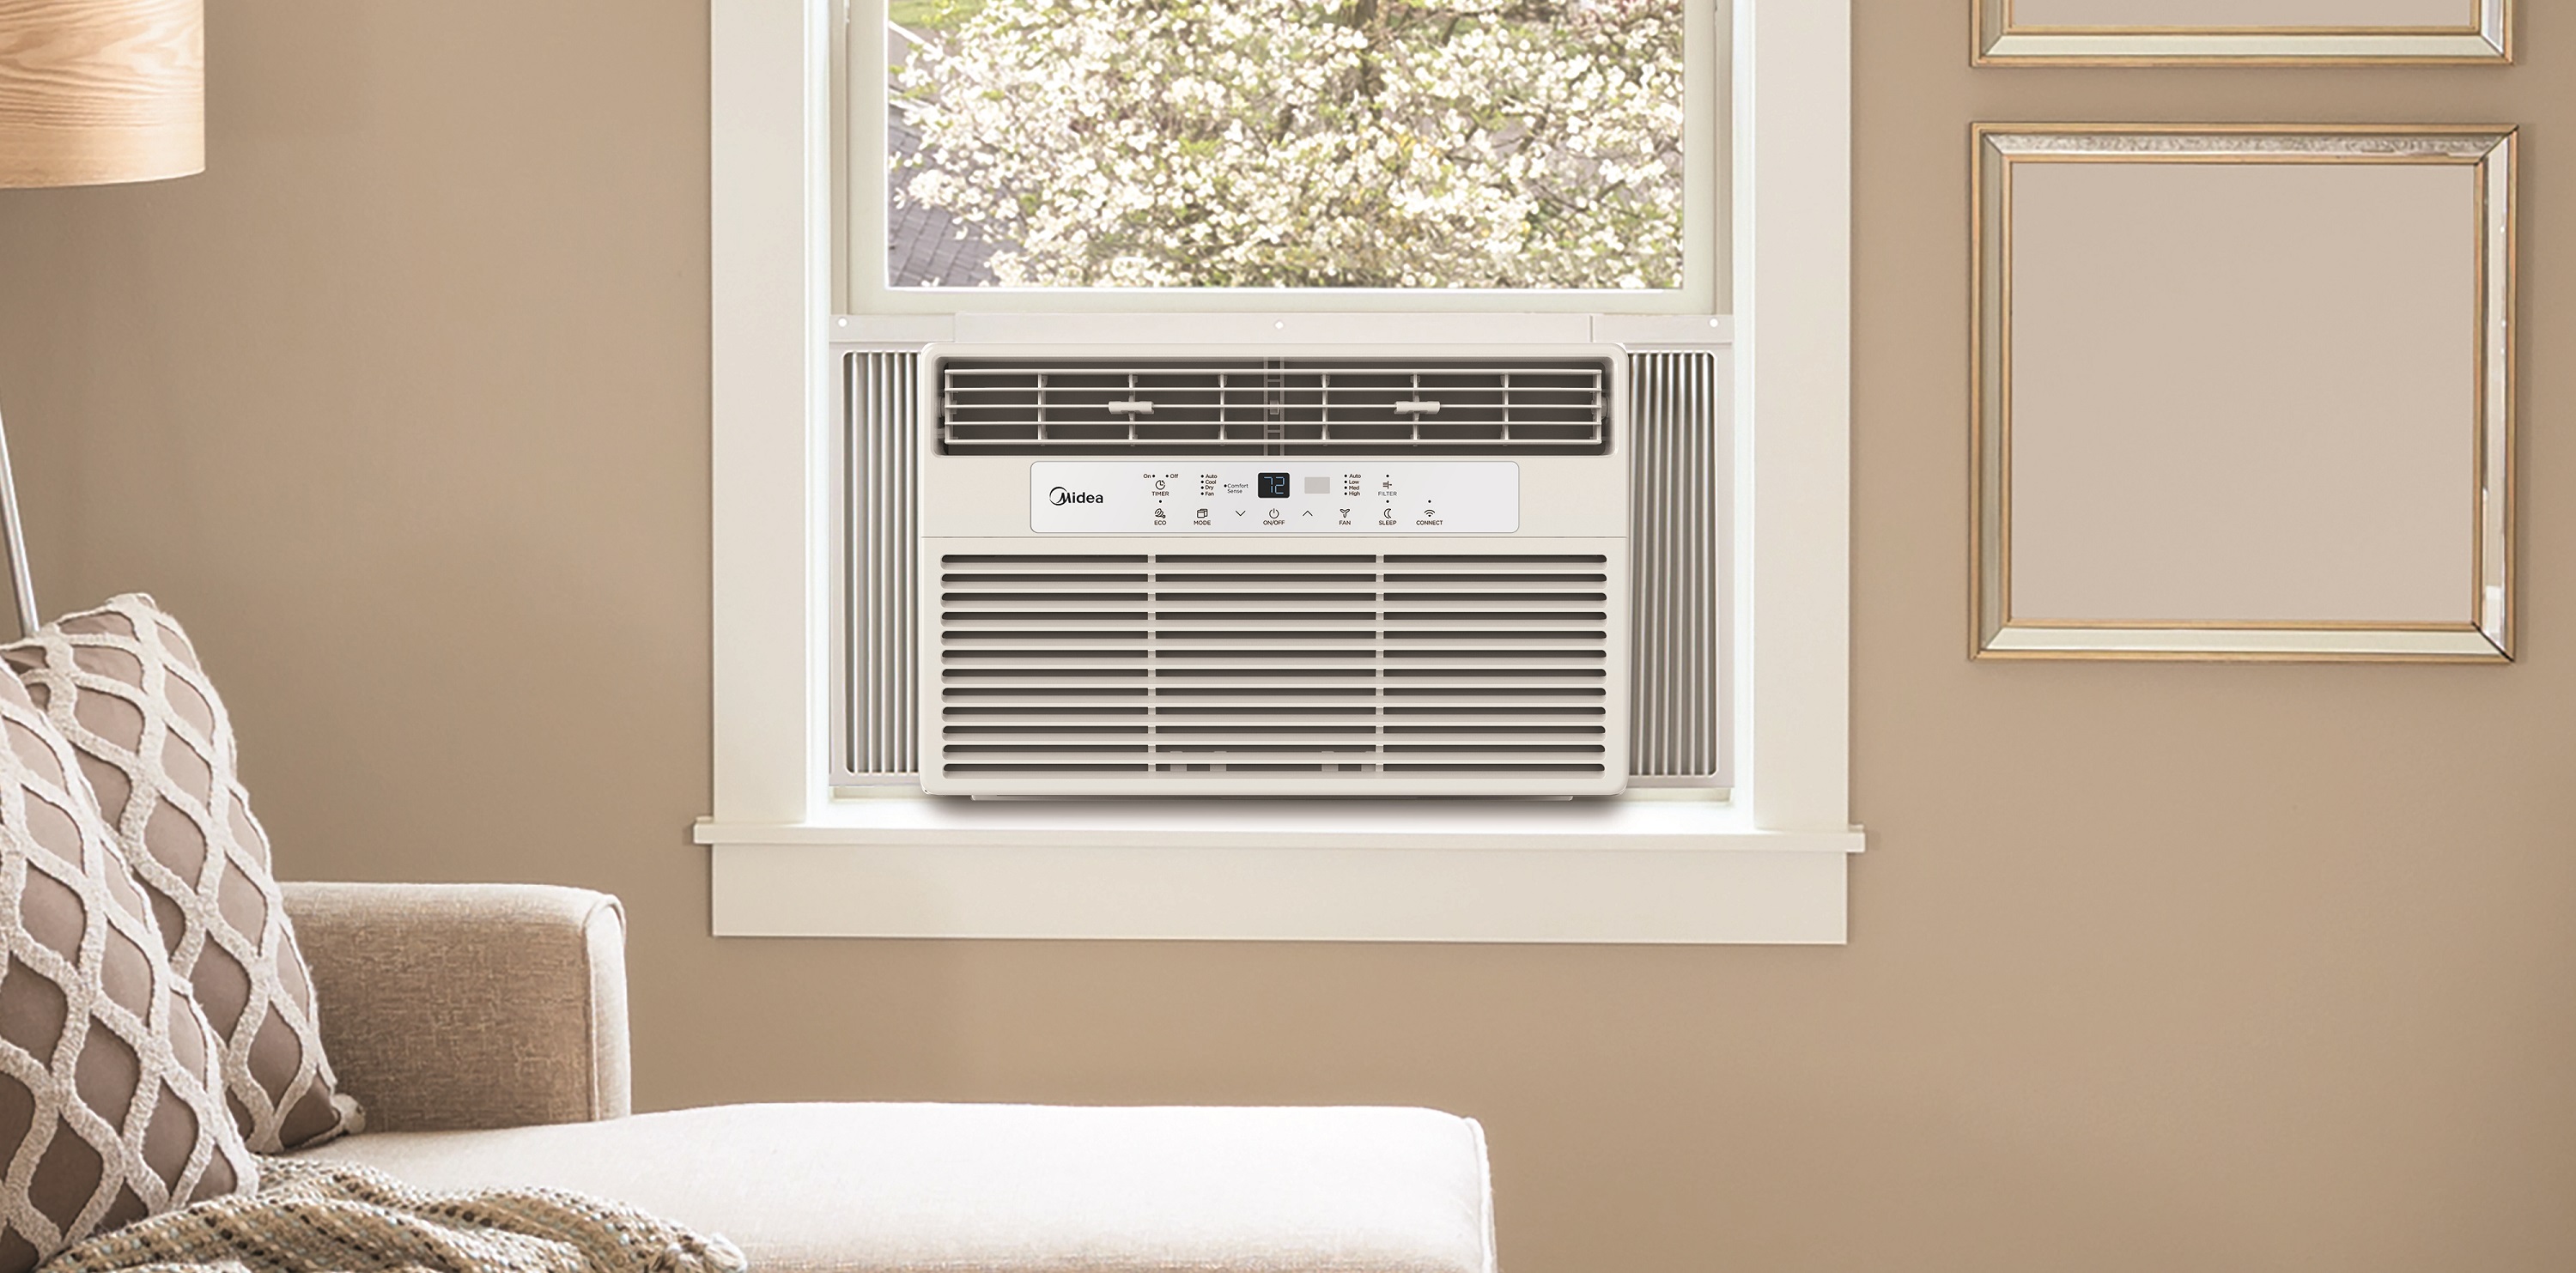 Midea 8,000 BTU 115V Smart Window Air Conditioner with Comfort Sense Remote, Covers up to 350 Sq. ft., White, MAW08S1WWT - image 4 of 22